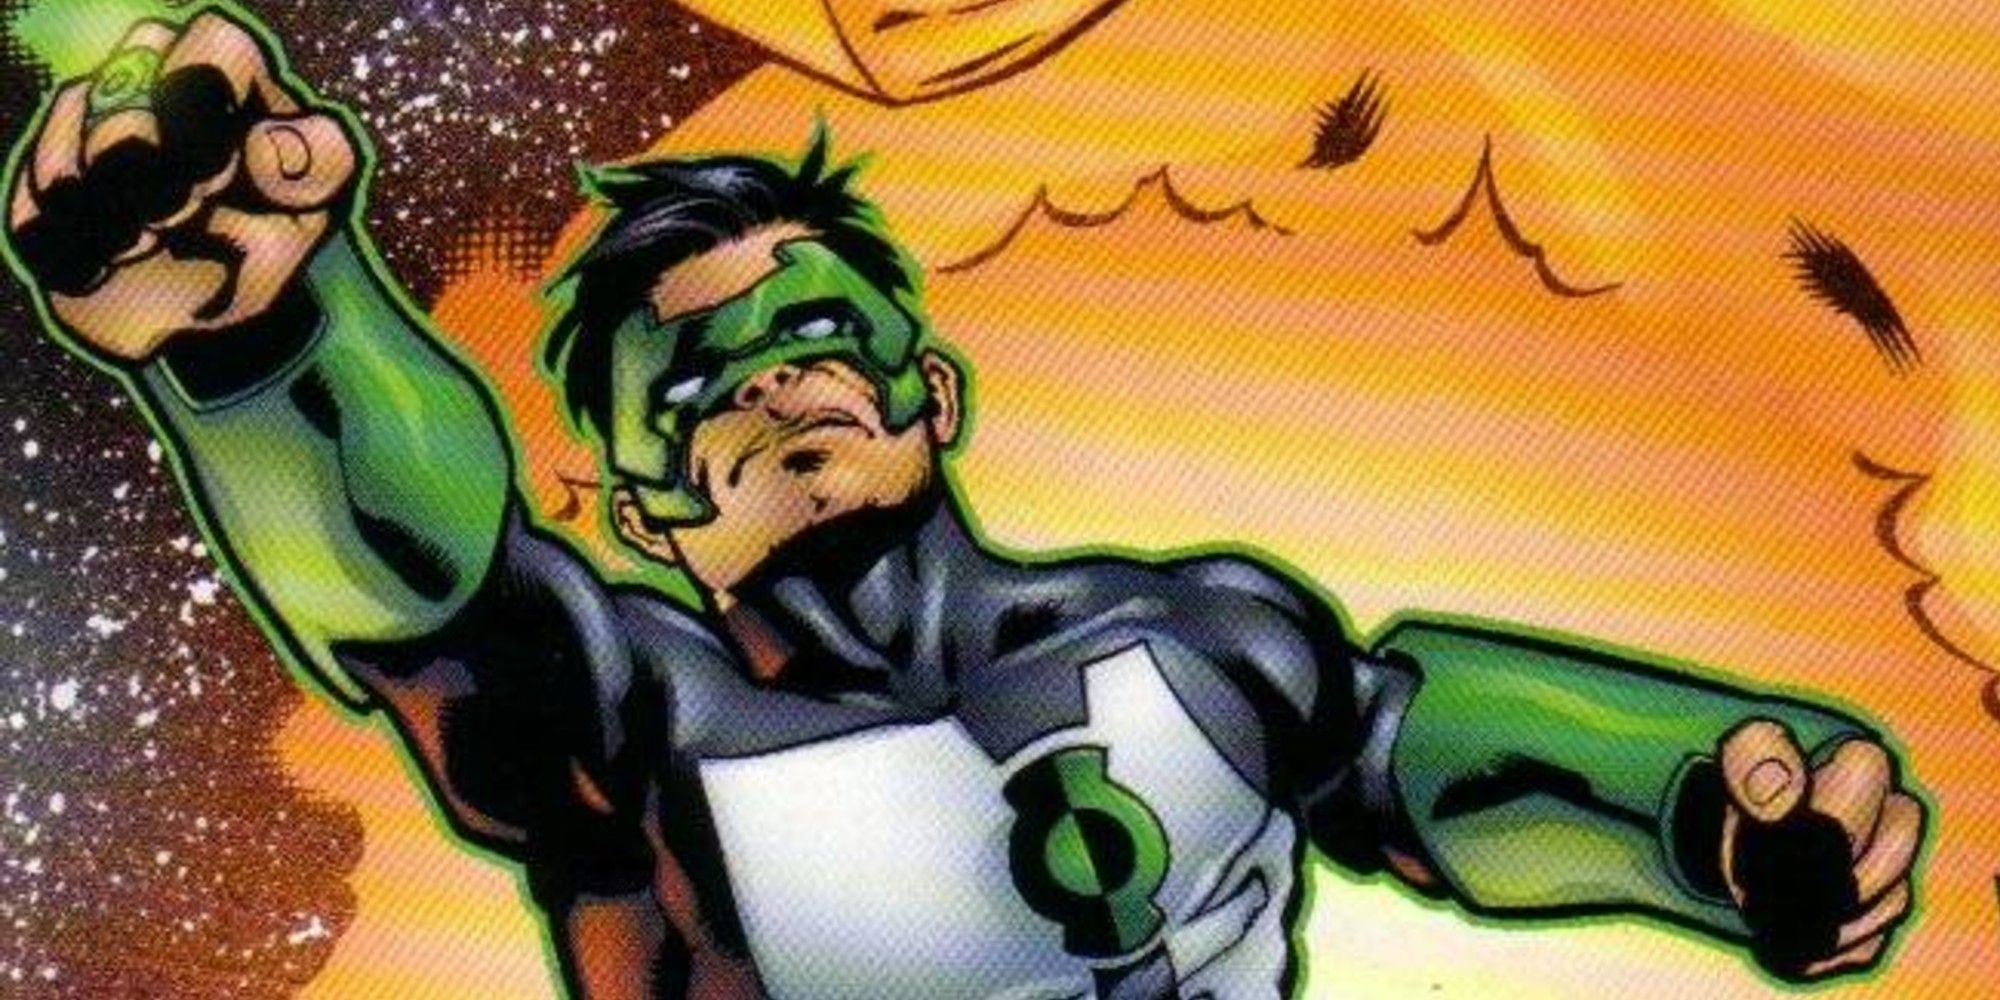 Kyle Rayner flying through outer space in DC Comics